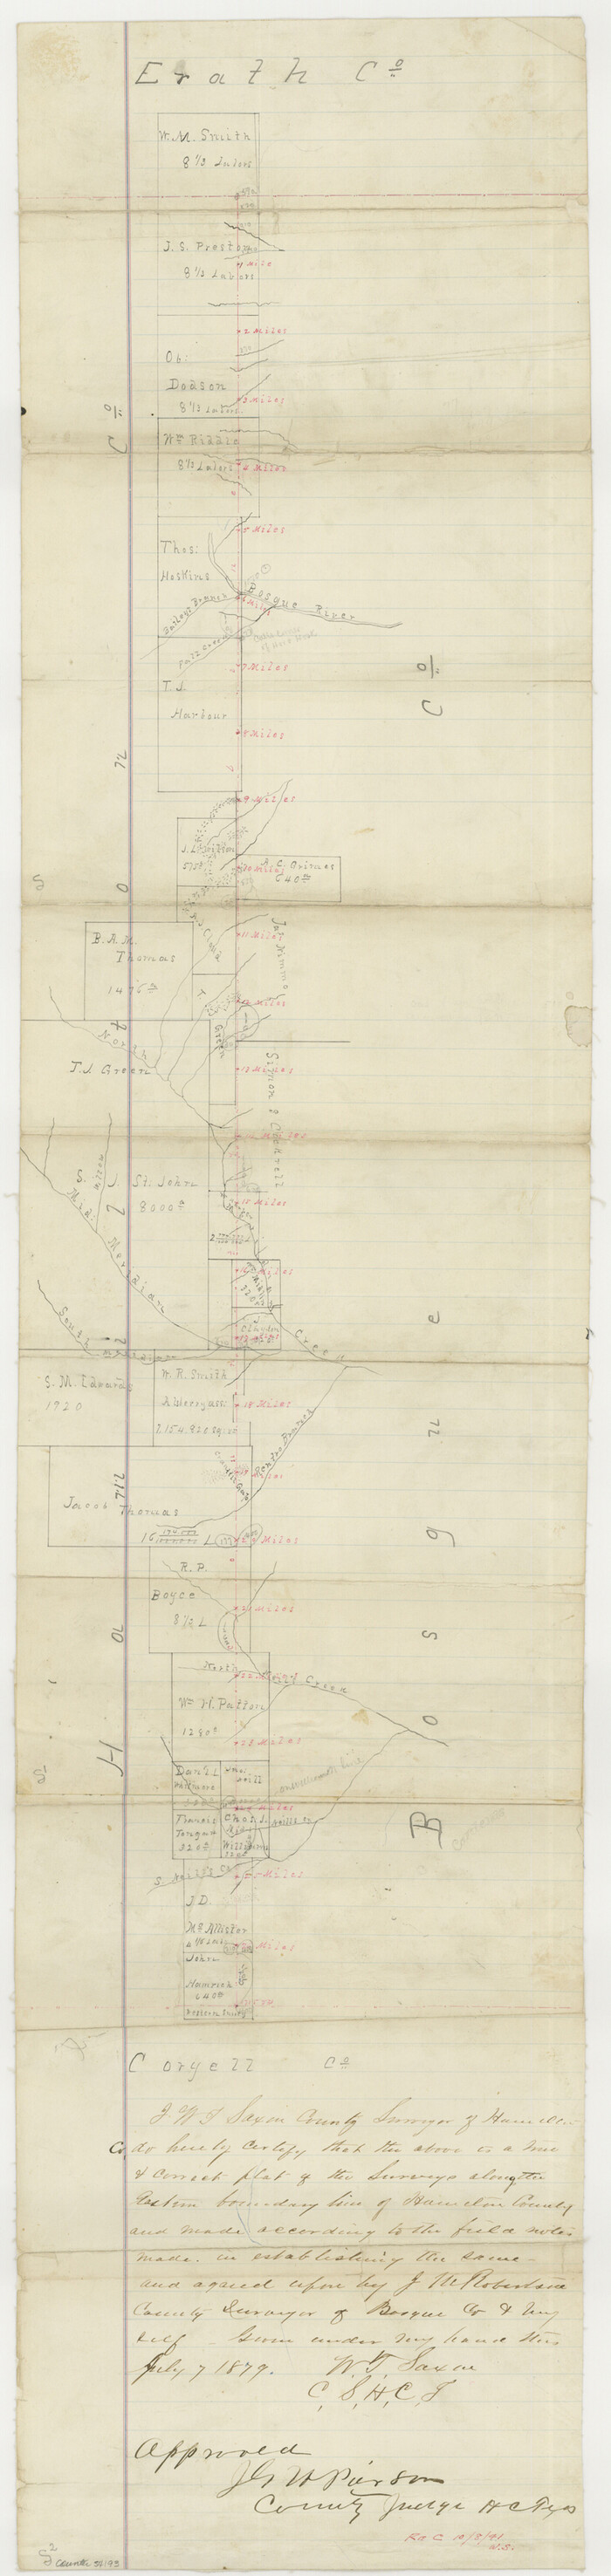 54193, Hamilton County Boundary File 1a, General Map Collection